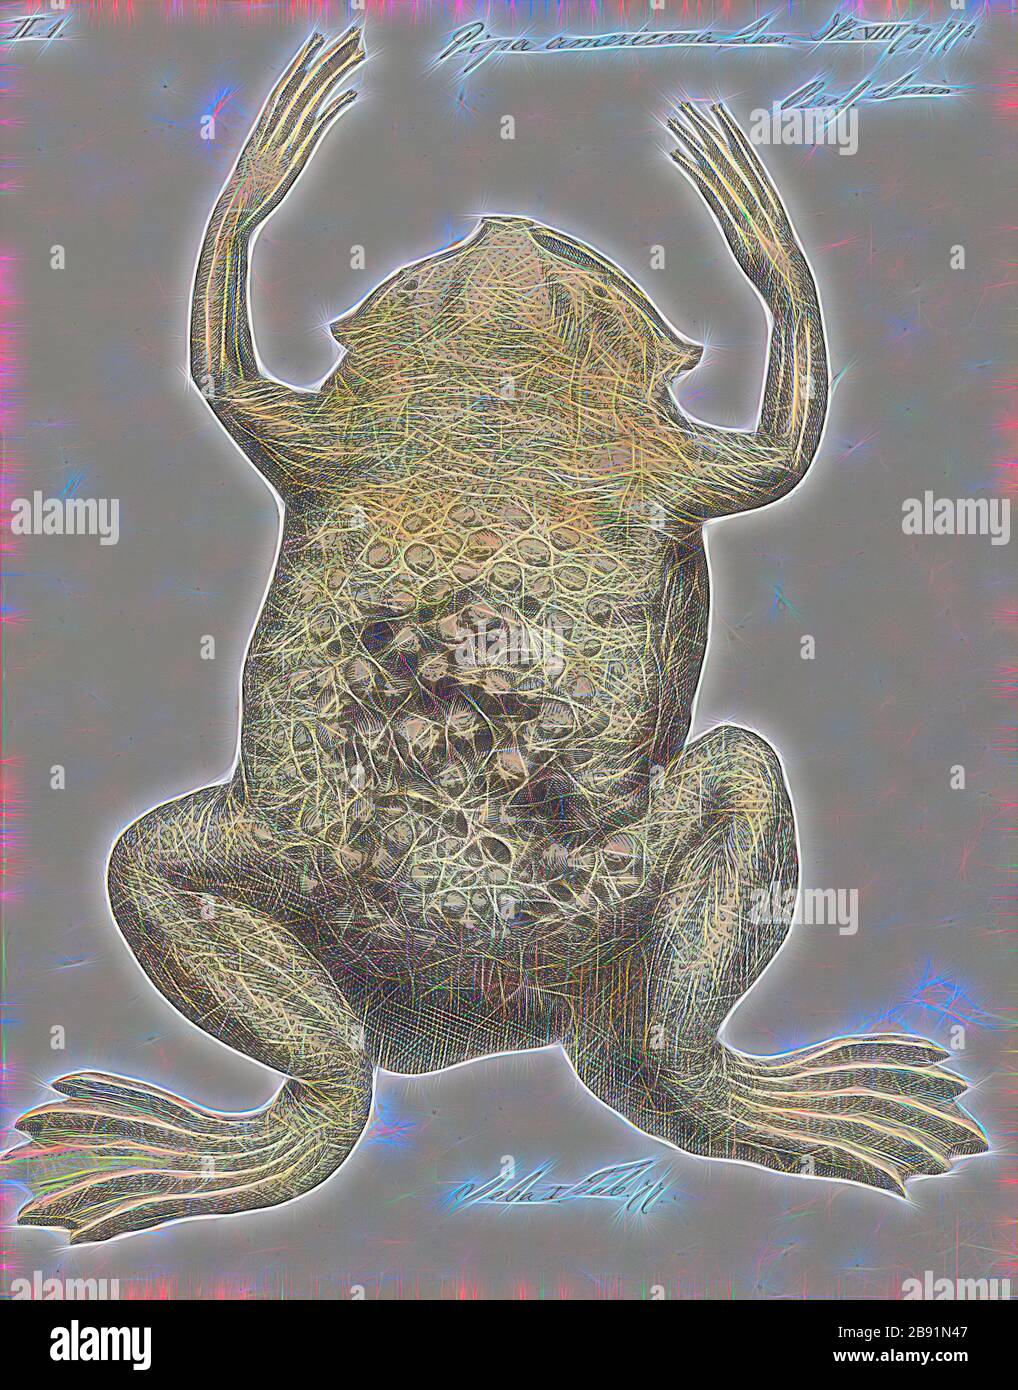 Pipa americana, Print, The common Suriname toad or star-fingered toad (Pipa pipa) is a species of frog in the family Pipidae found in Bolivia, Brazil, Colombia, Ecuador, French Guiana, Guyana, Peru, Suriname, Trinidad and Tobago, and Venezuela. In Spanish it is called aparo, rana comun de celdillas, rana tablacha, sapo chinelo, sapo chola, or sapo de celdas. In Portuguese, it is known as sapo pipa due to its shape, as pipa means kite. Its natural habitats are subtropical or tropical moist lowland forests, subtropical or tropical swamps, swamps, freshwater marshes, and intermittent freshwater m Stock Photo